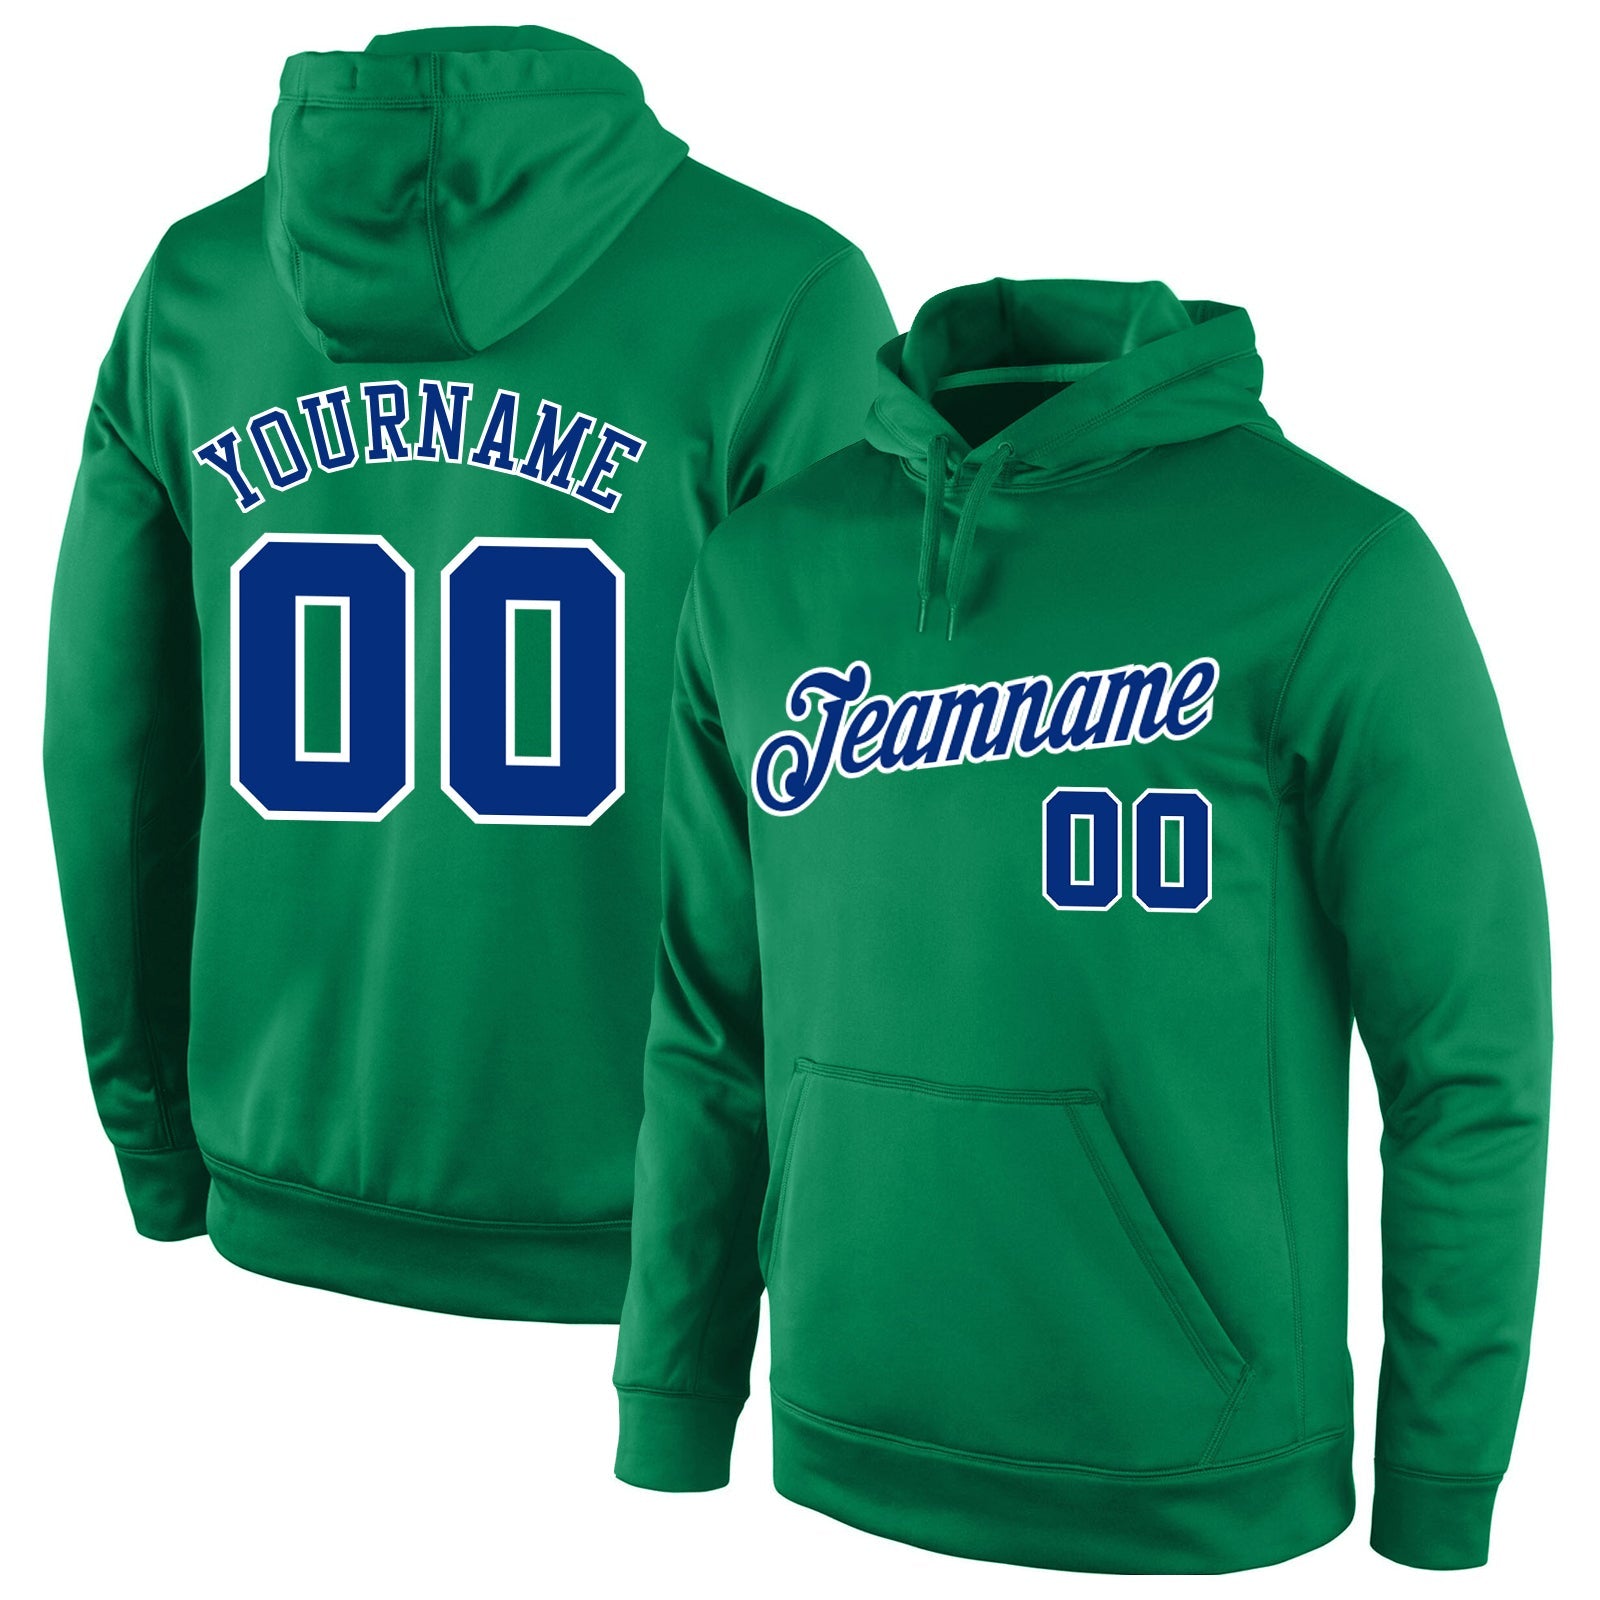 Custom Stitched Kelly Green Royal-White Sports Pullover Sweatshirt Hoodie